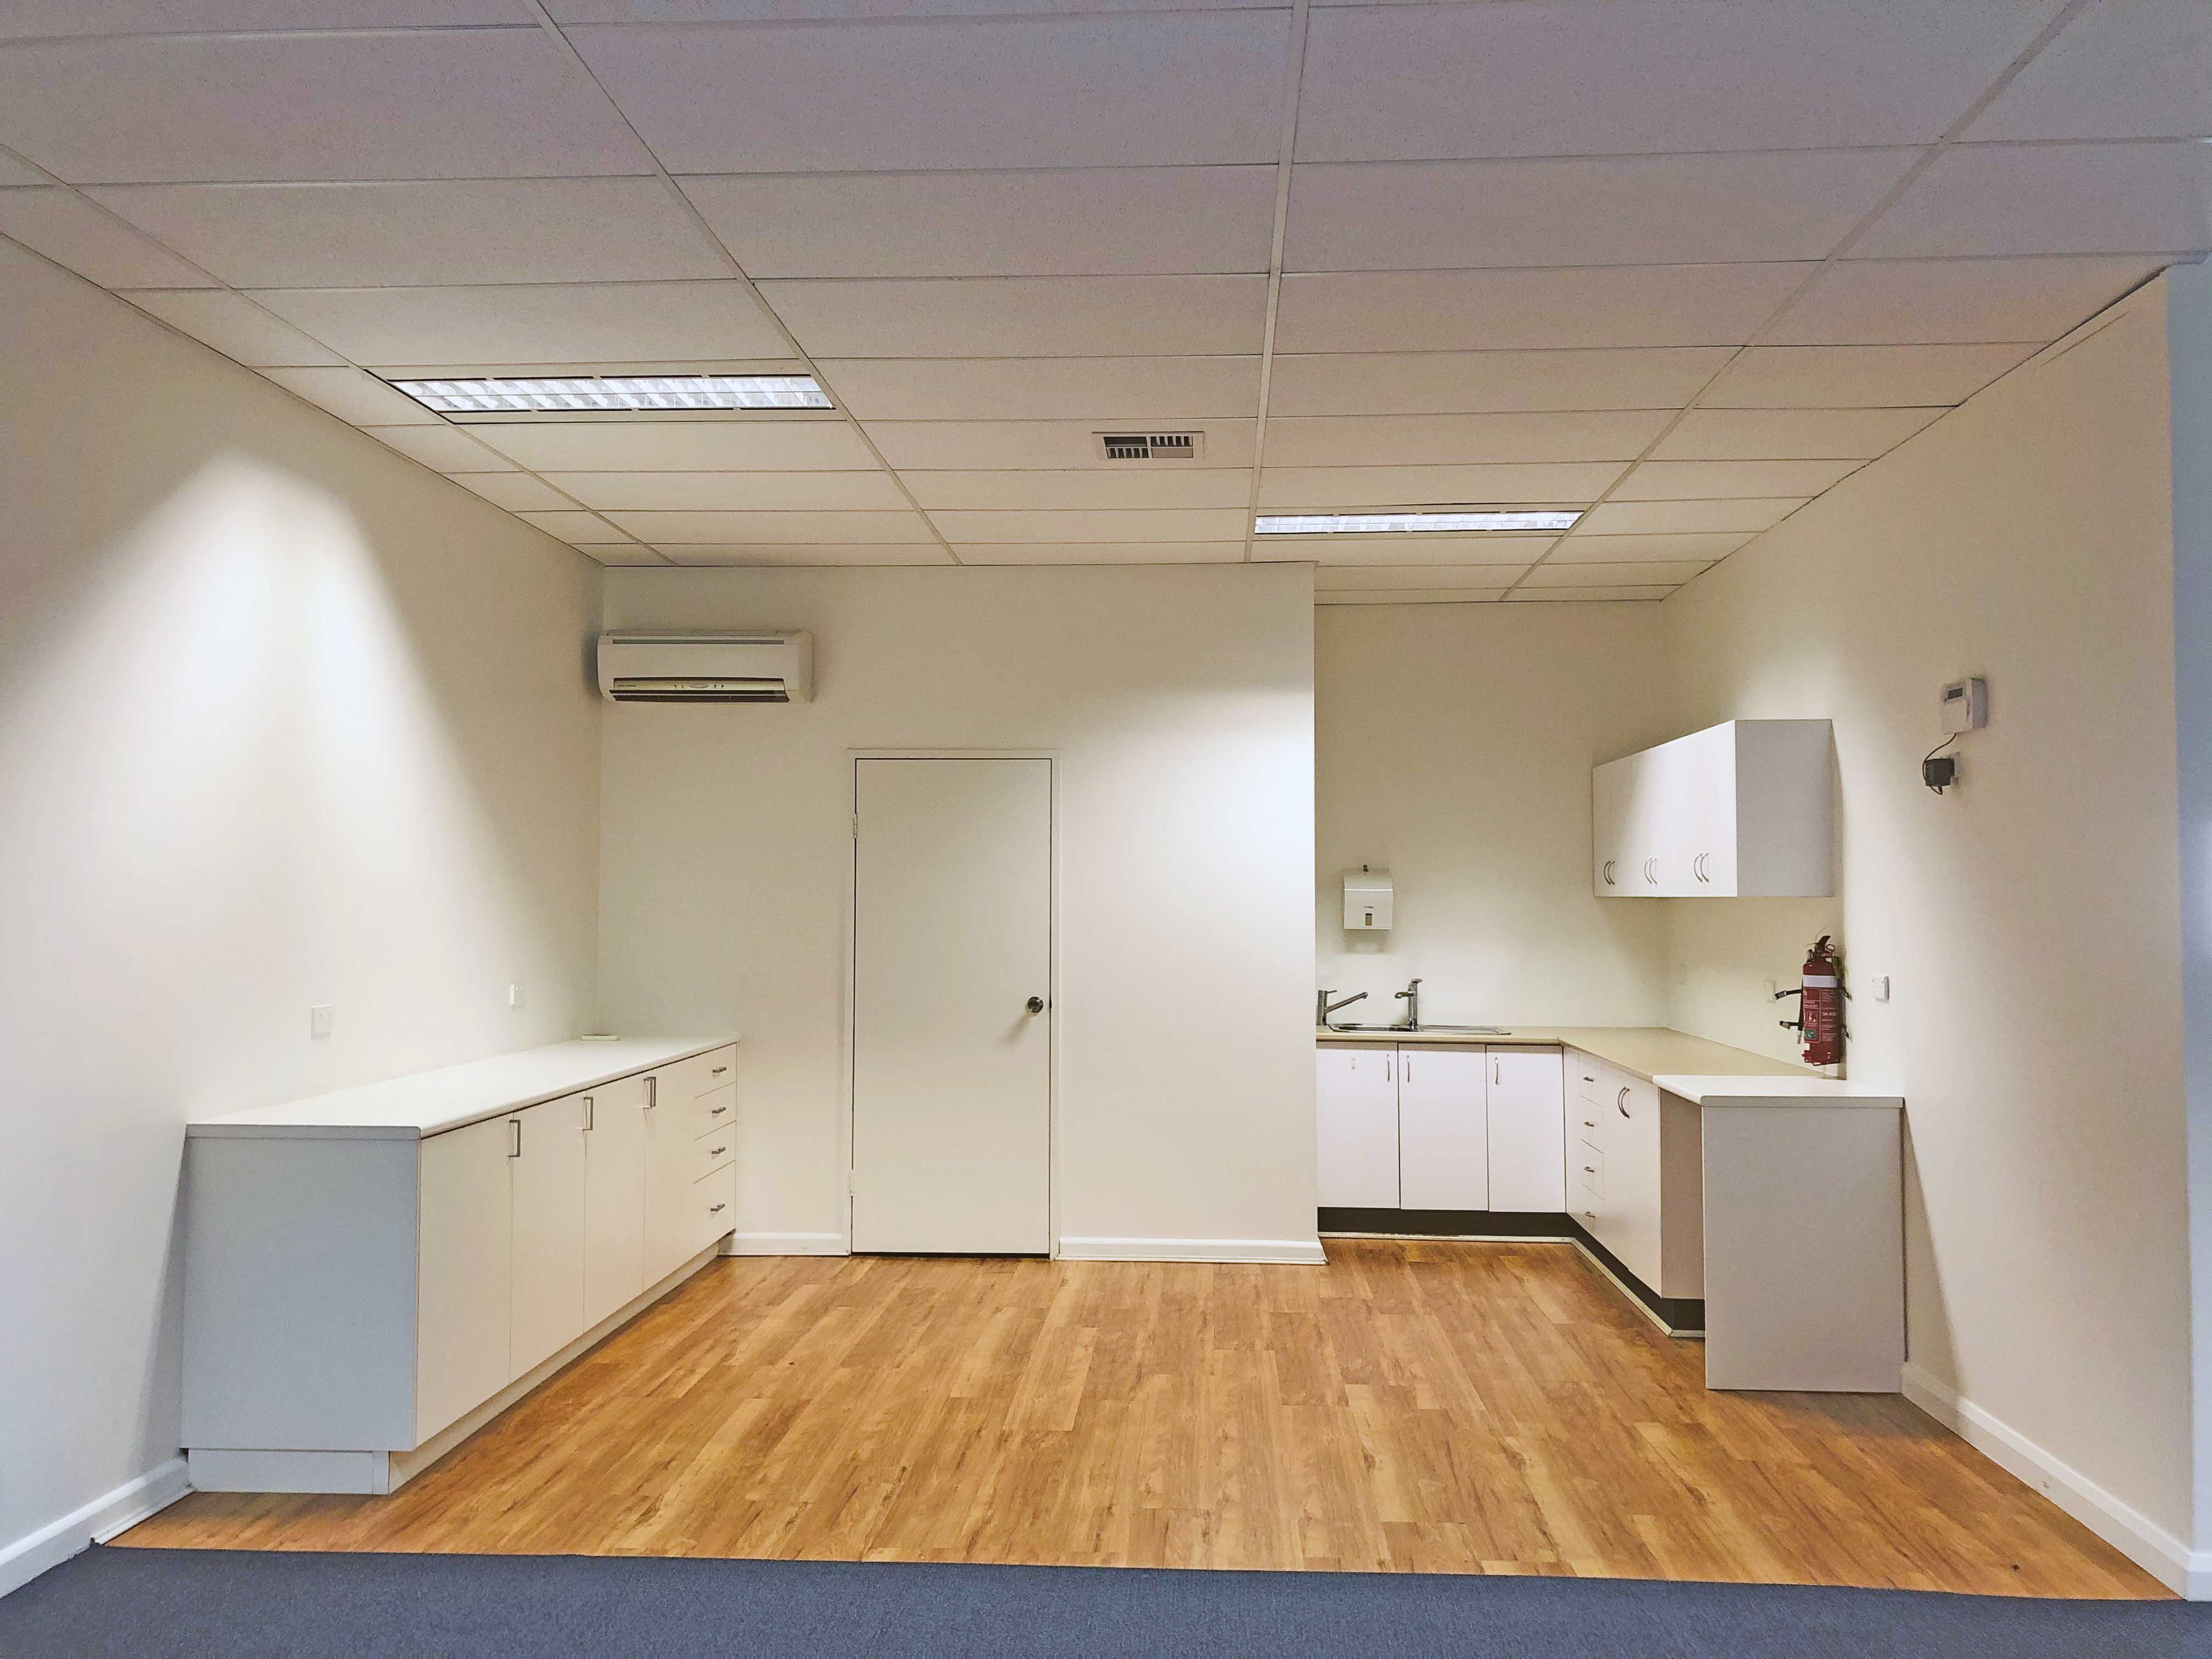 Commercial property for lease in macquarie park 3